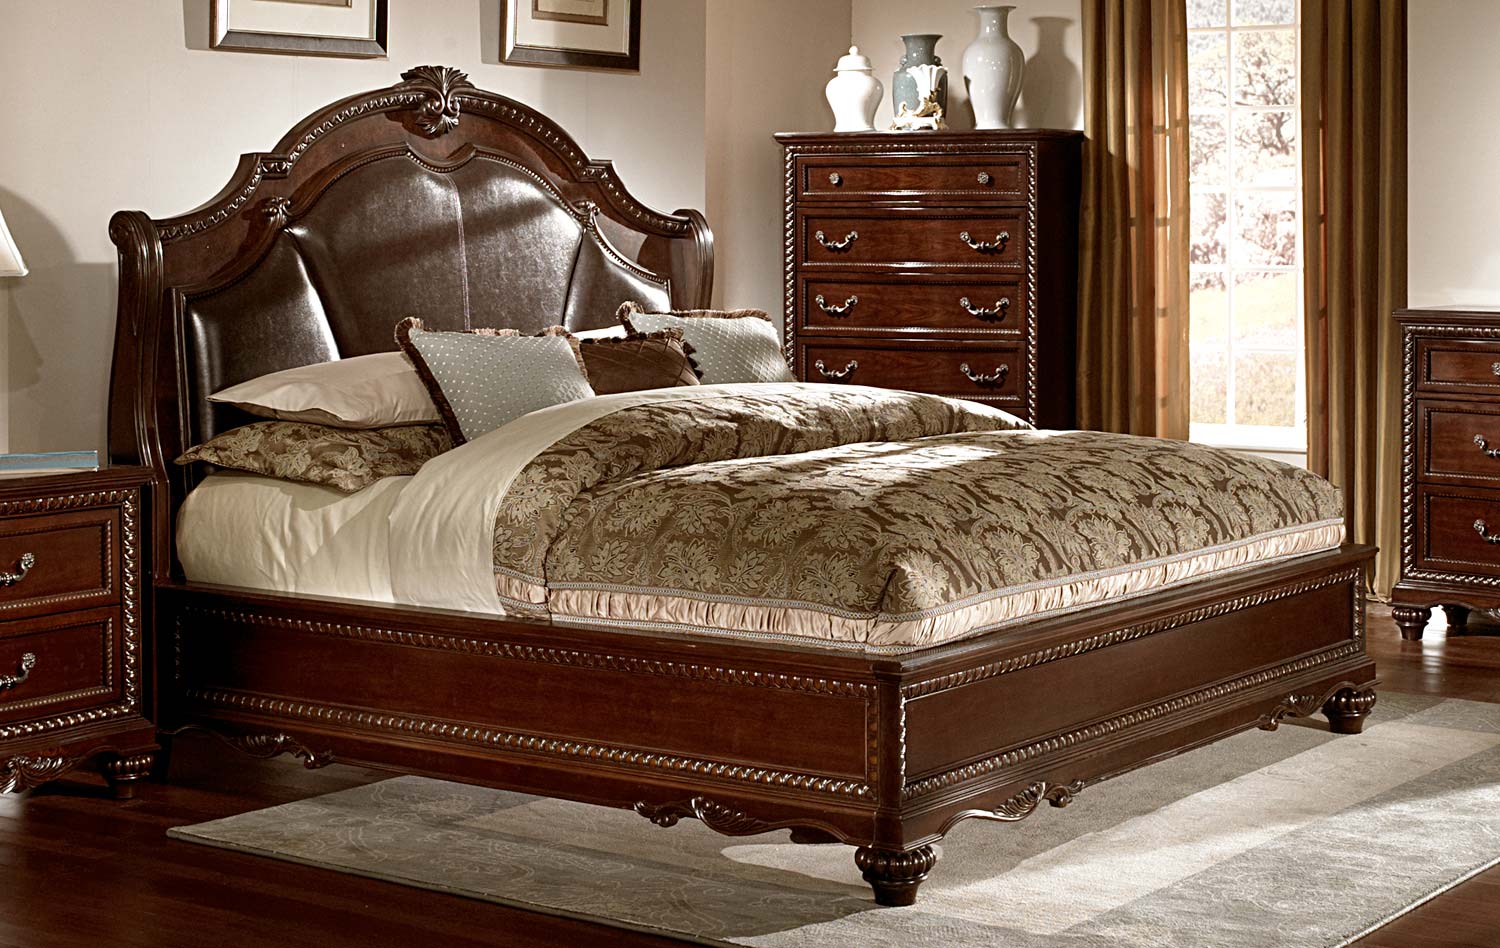 Homelegance Hampstead Court Bed - Cherry